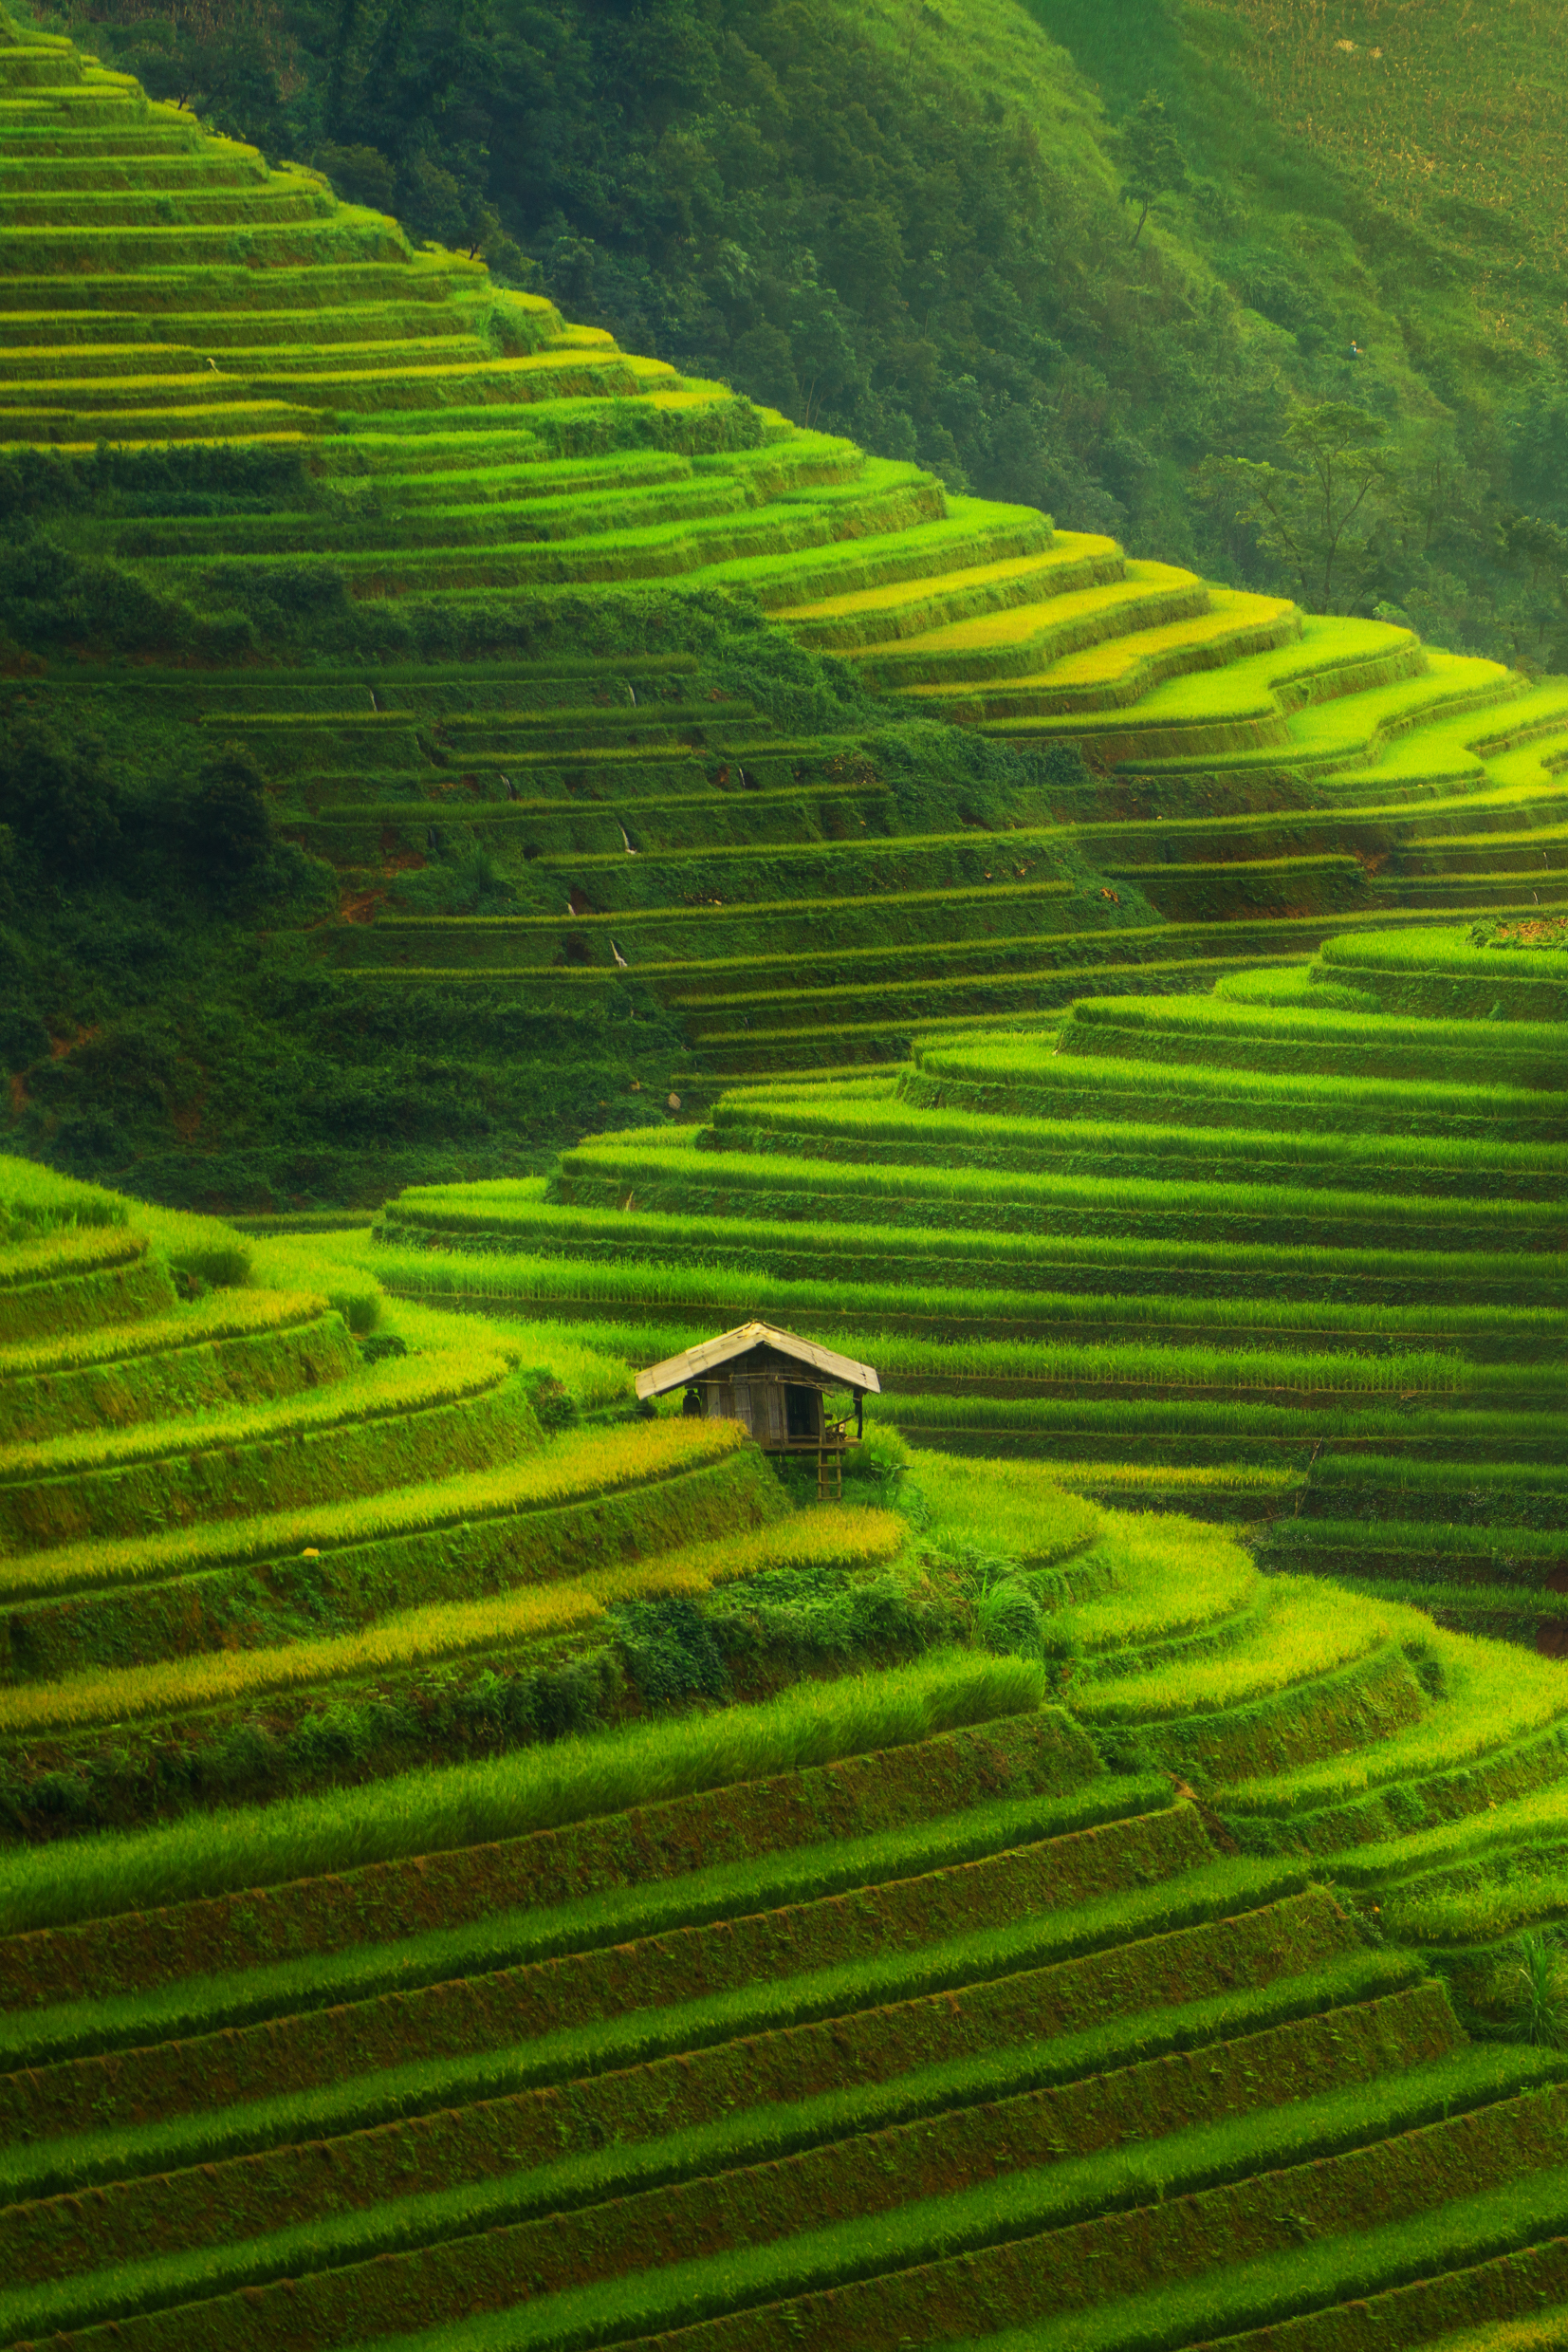 Terraced rice field landscape near Sapa in Vietnam. Mu Cang Chai Rice Terrace Fields stretching across the mountainside, layer by layer reaching up as endless, with about 2,200 hectares of rice terraces, of which 500 hectares of terraces of 3 communes such as La Pan Tan, Che Cu Nha and Ze Xu Phinh.